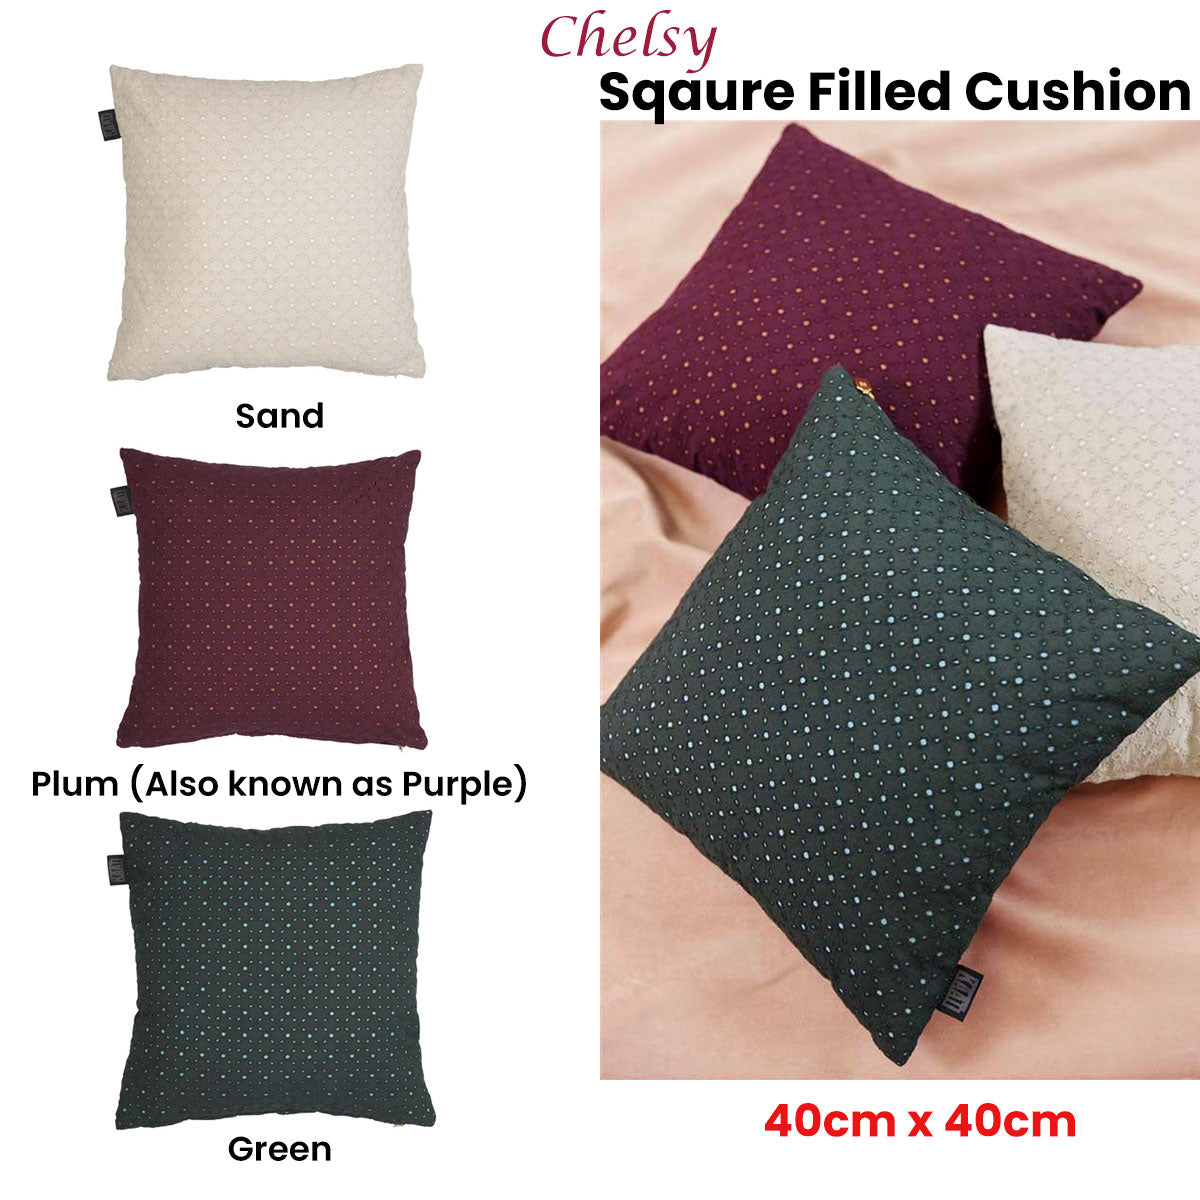 Bedding House Chelsy Plum (Also Known as Purple) Square Filled Cushion 40cm x 40cm